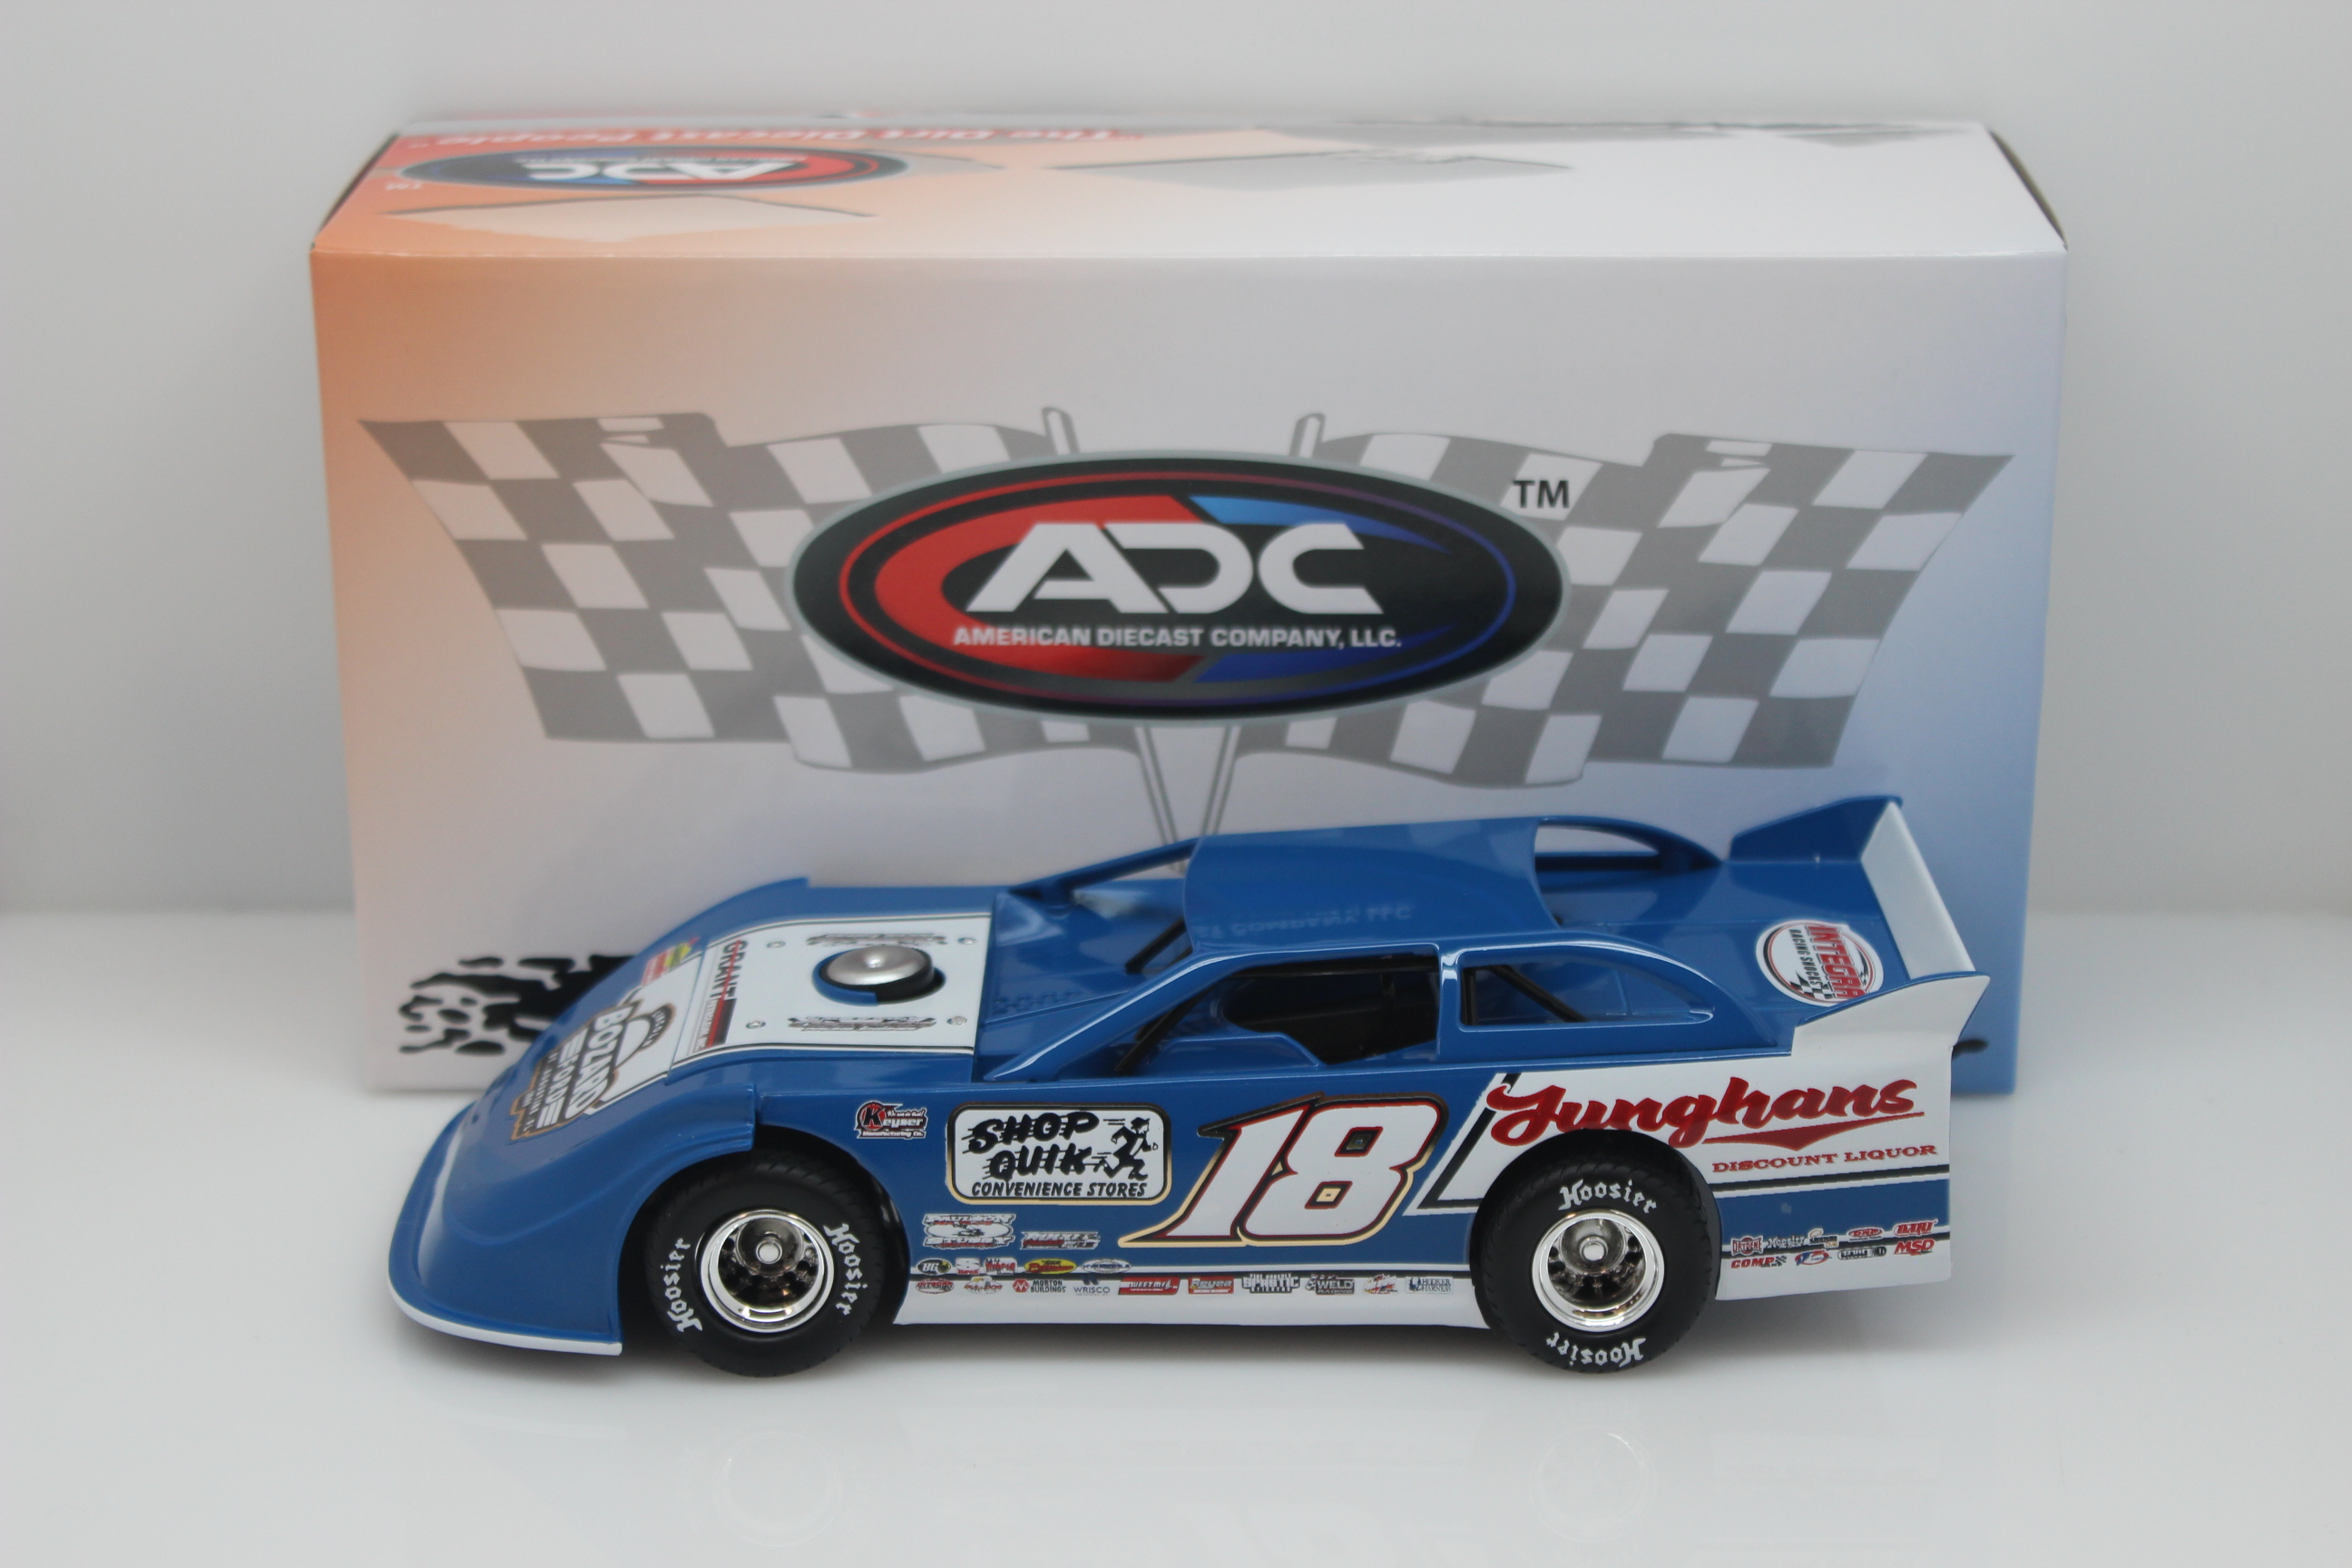 2003 Don O’Neal 71 ADC 1:64 Scale Dirt Late Model Race Car 